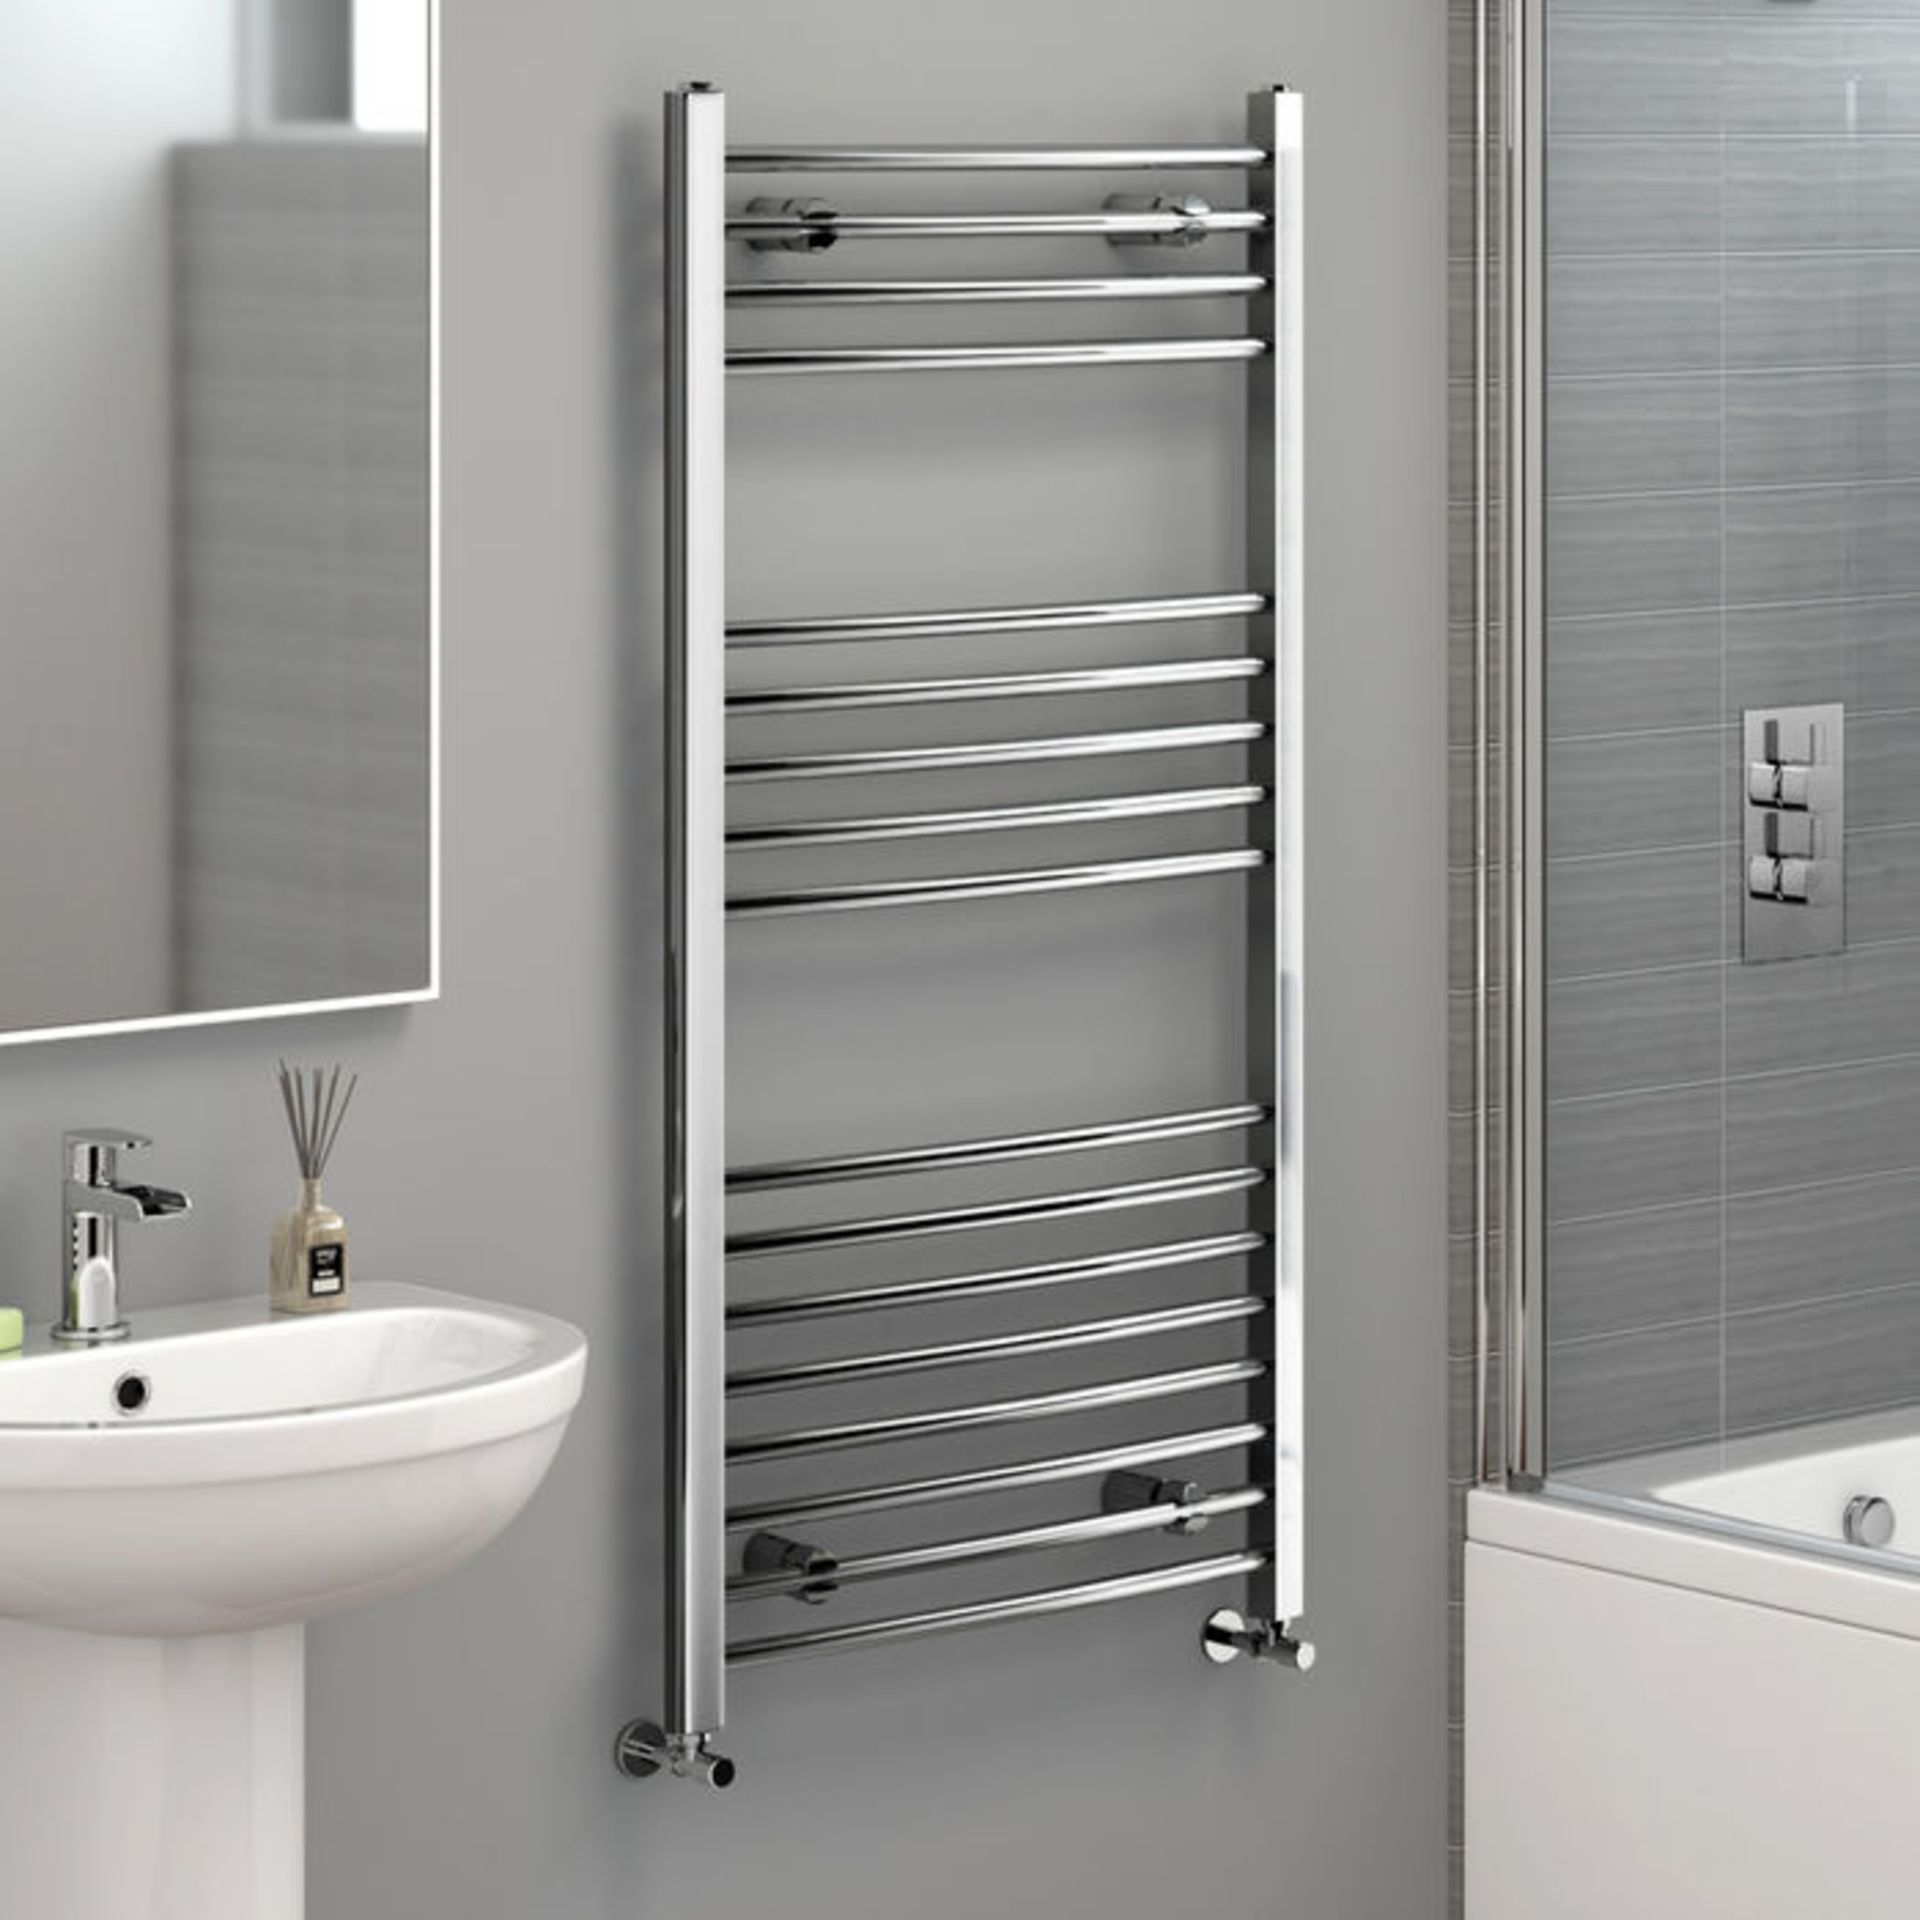 (T85) 1200x600mm - 20mm Tubes - Chrome Curved Rail Ladder Towel Radiator.Made from chrome plated low